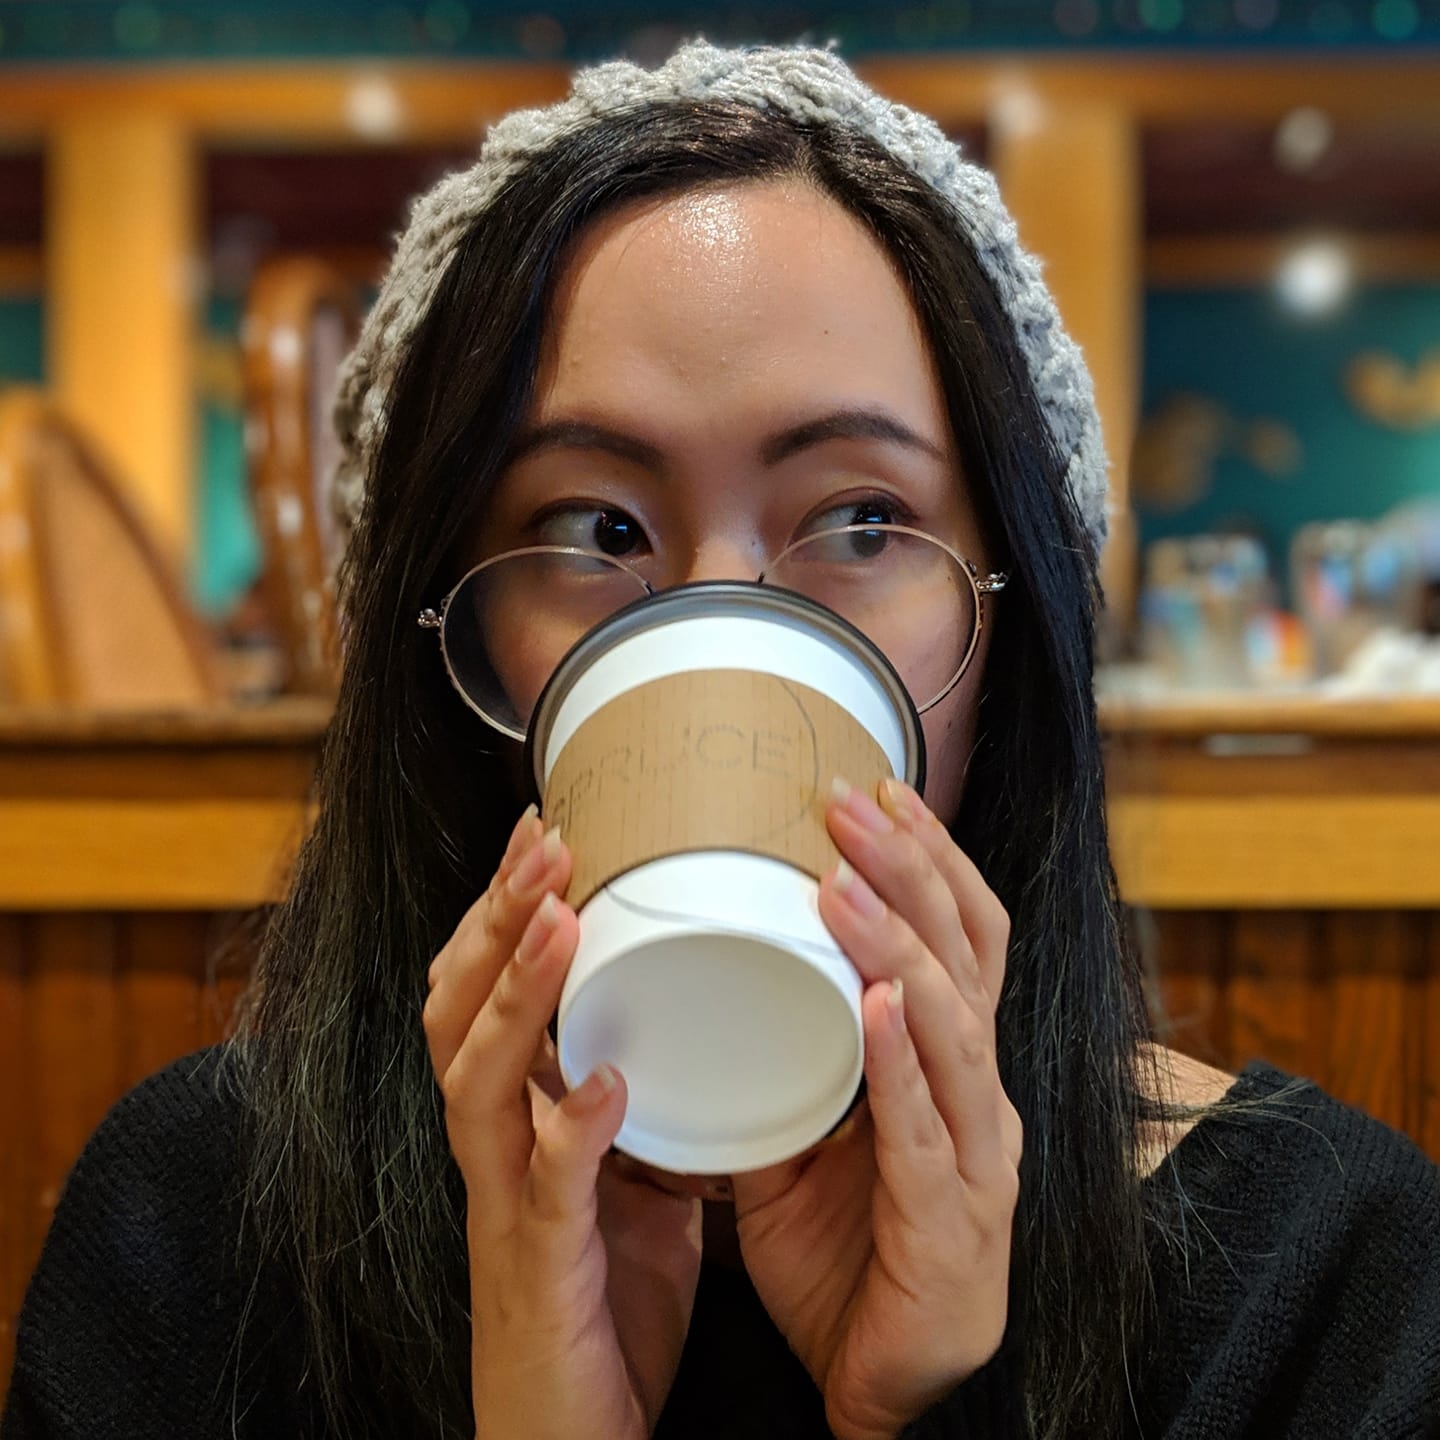 Portrait of Eileen drinking coffee. Girl with long black hair and glasses wearing a gray beanie, drinking from a paper coffee cup, with eyes looking to the right.